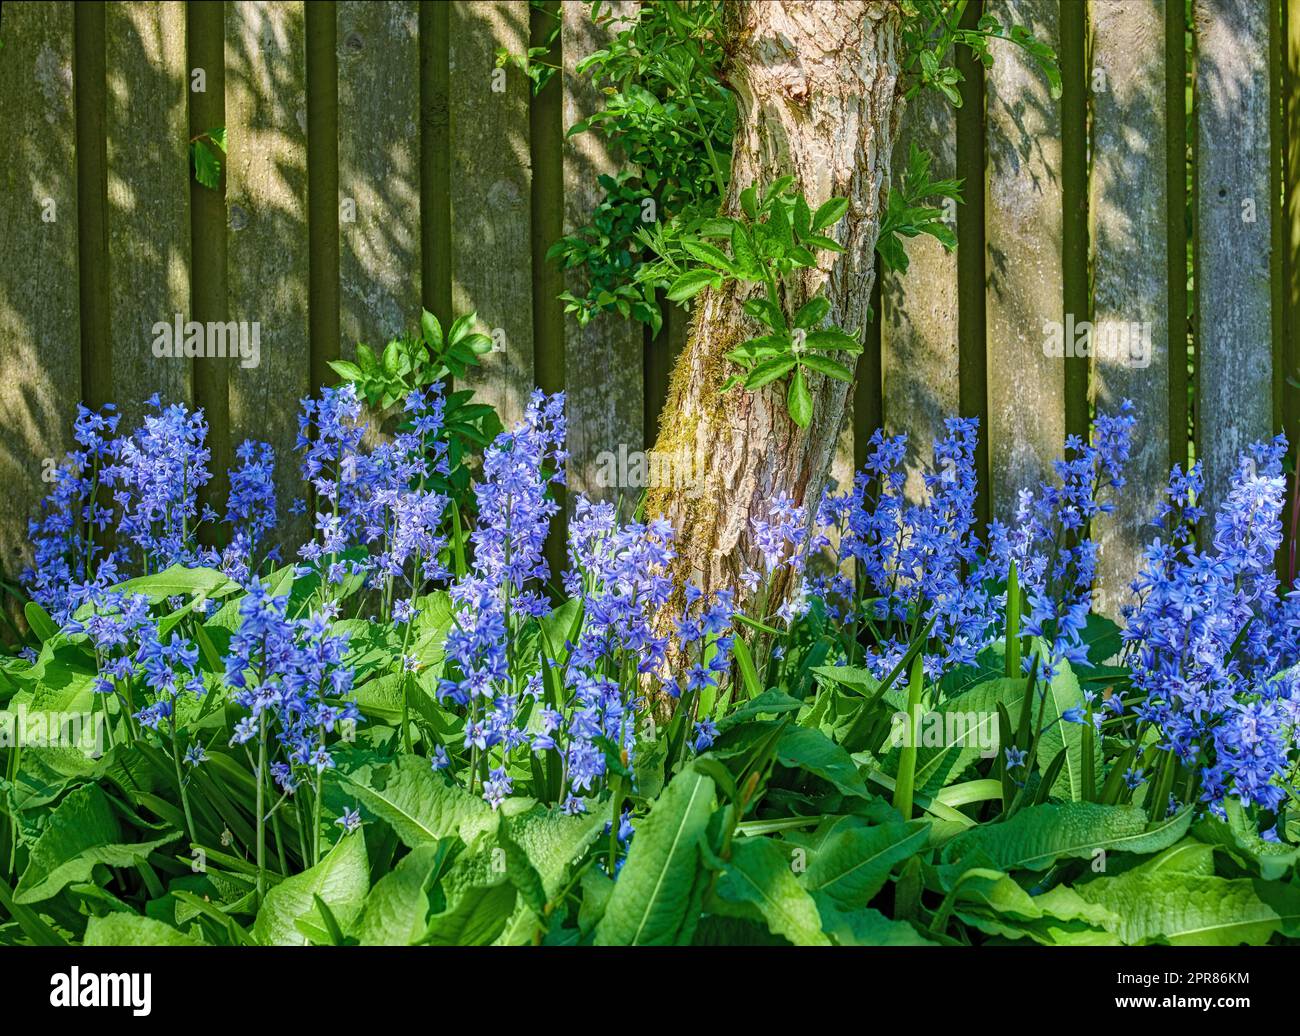 Landscape view of common bluebell flowers growing and flowering on green stems in private backyard or secluded home garden. Textured detail of blooming blue kent bells or campanula plants blossoming Stock Photo